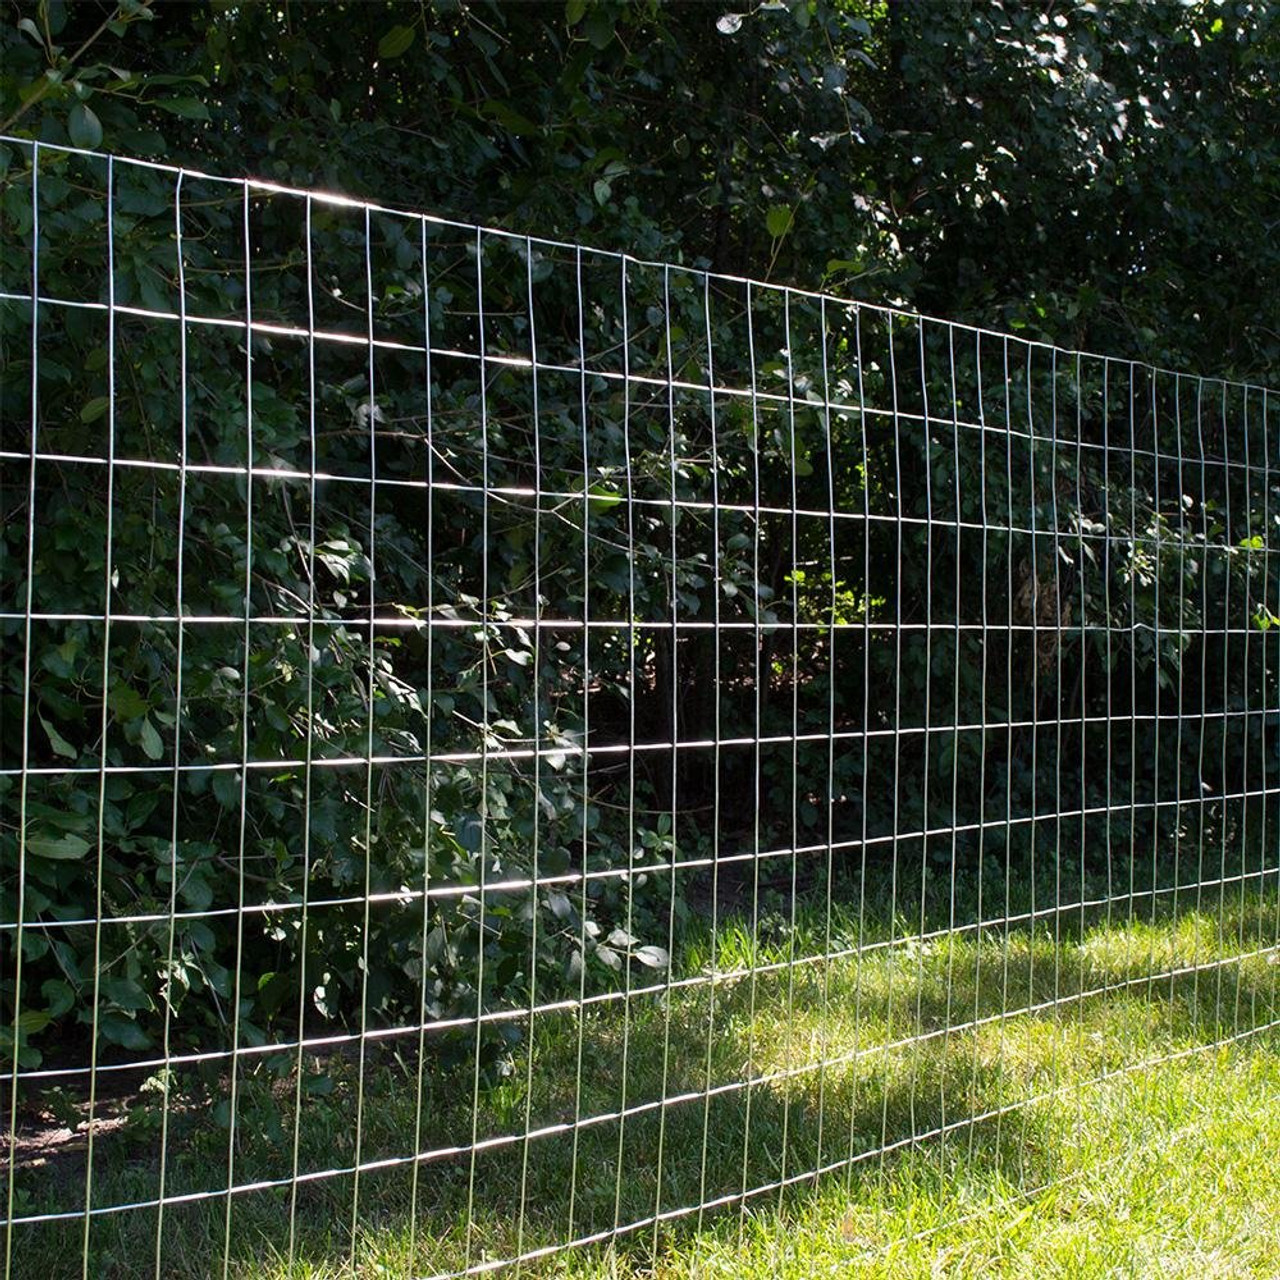 Fencer Wire Welded Wire Fence 12.5 Gauge, Galvanized Welded Fence Wire  Roll, Mesh Size 2-Inch x 4-Inch, Hog Wire Fencing Cage, Multiple Use for  Home